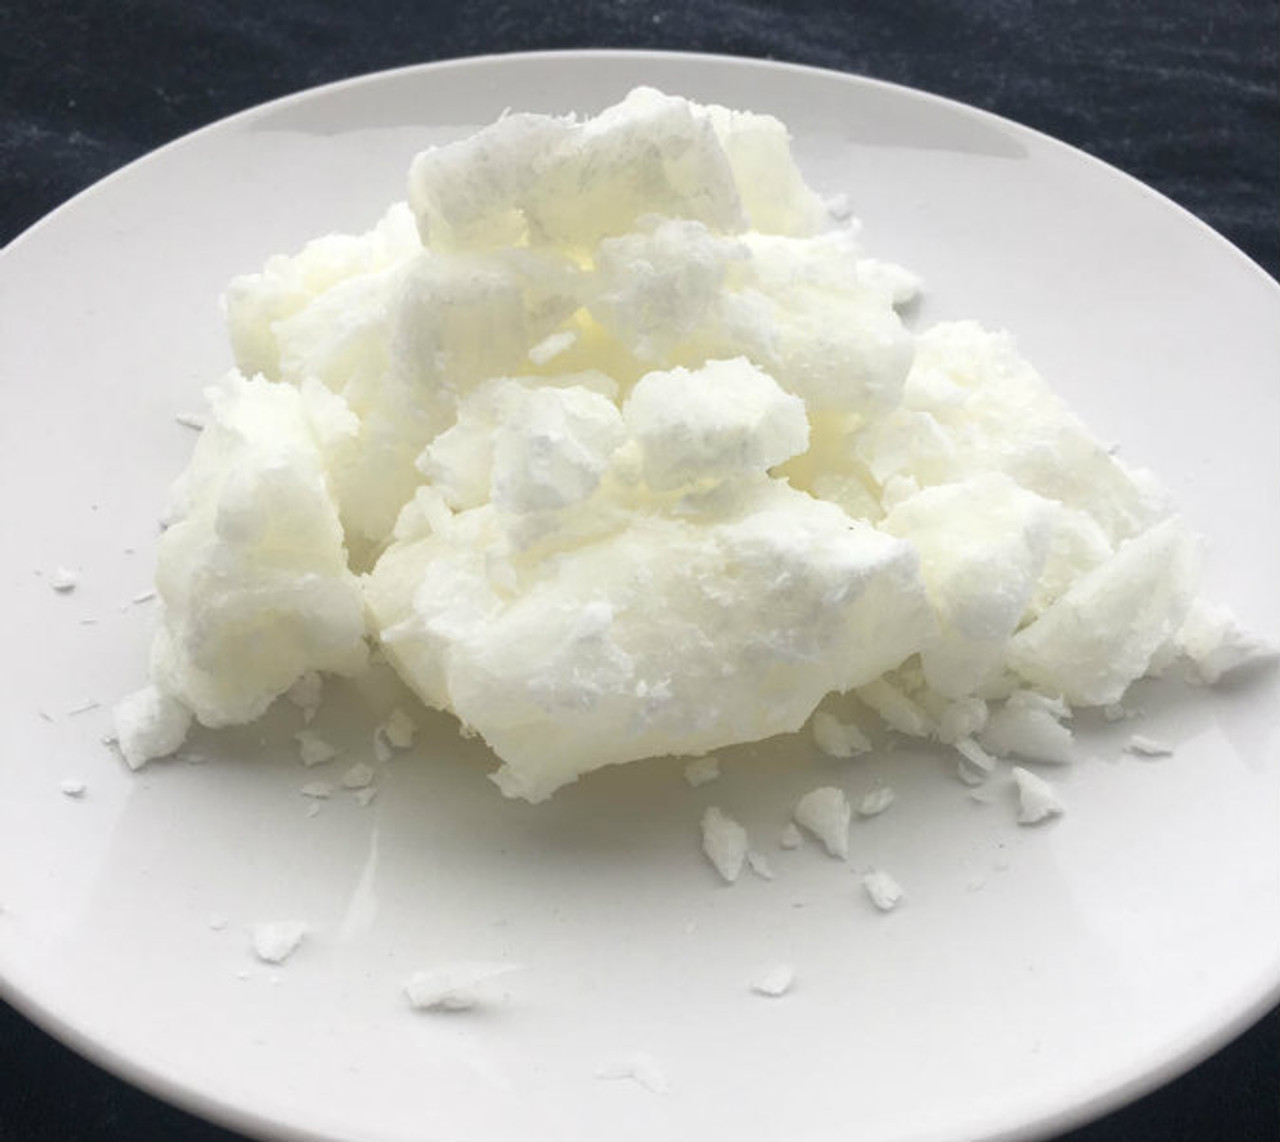 Shea Butter vs Sal Butter: Which Butter is Best for Soap Making?